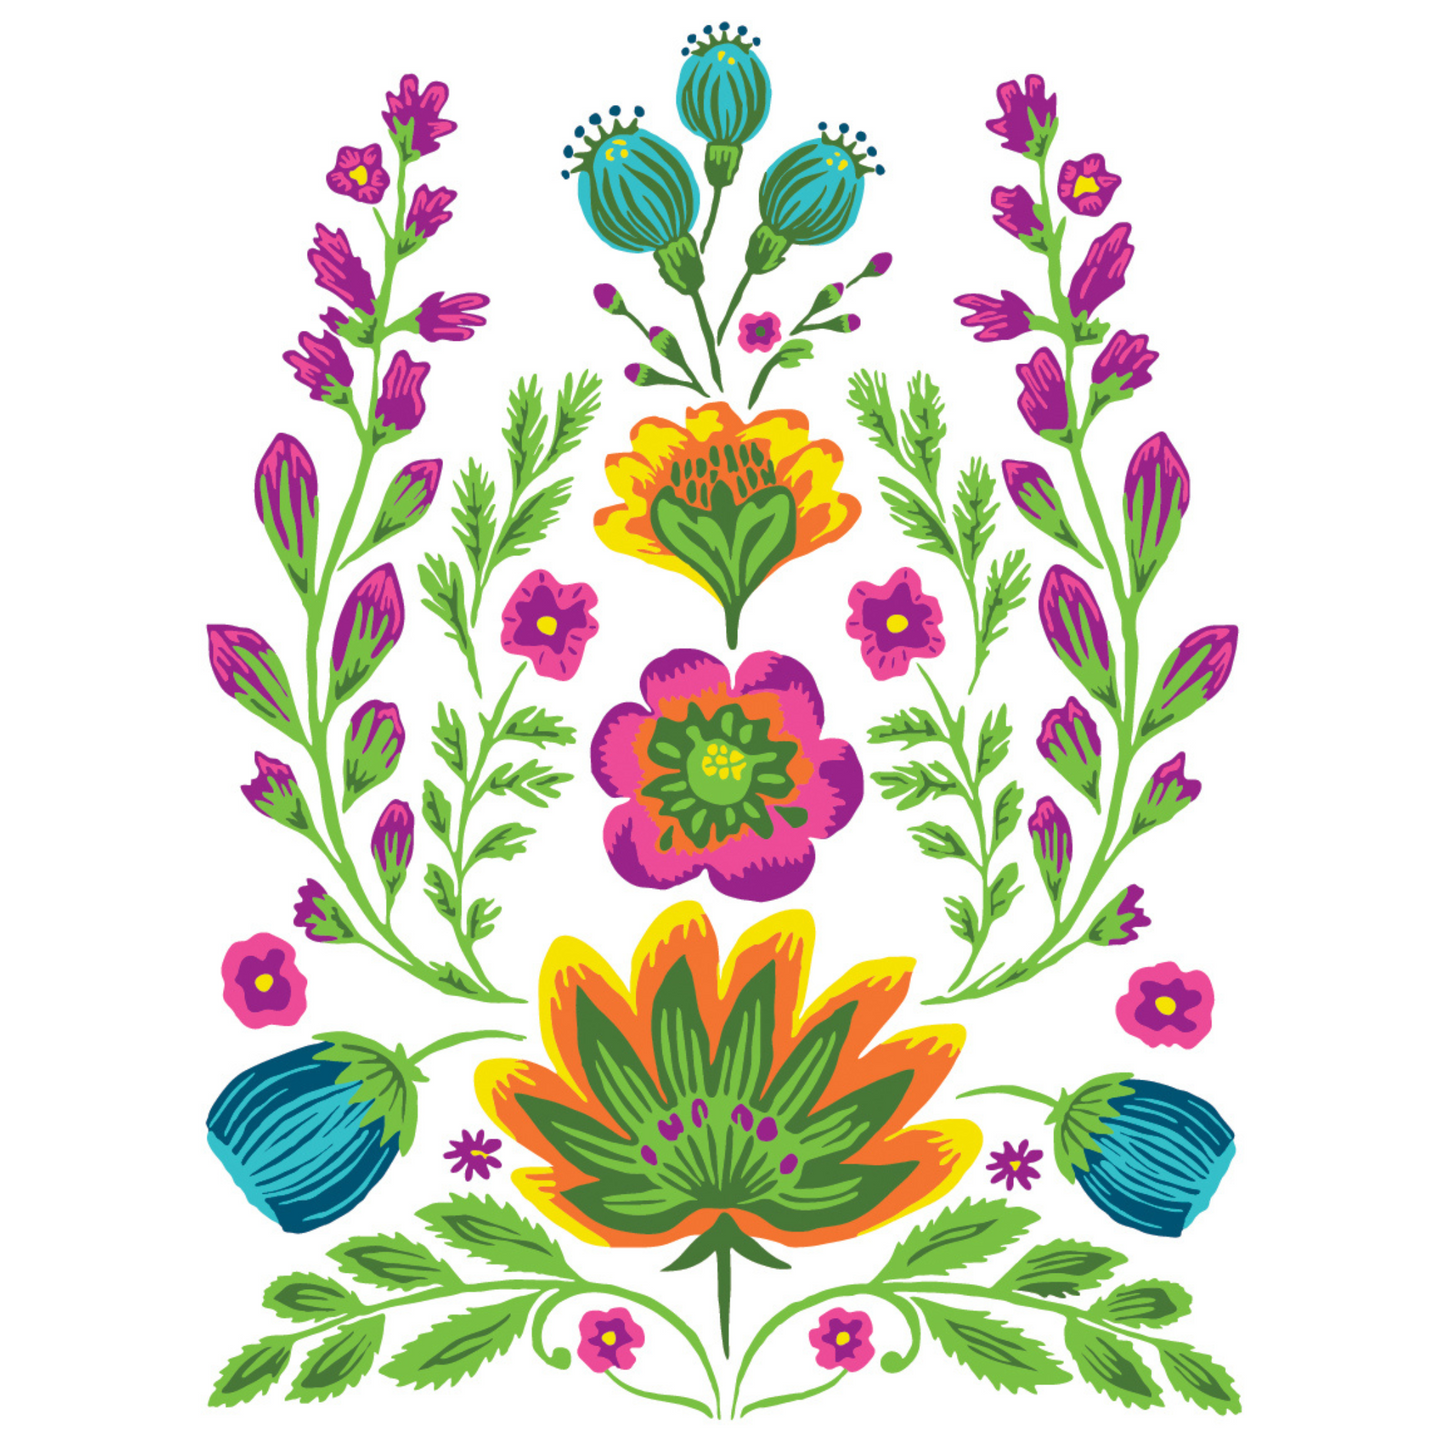 "Vida Flora" IOD Paint Inlay designed by Debi Beard from DIY Paint. Available at Milton's Daughter. Page 5 of 8.